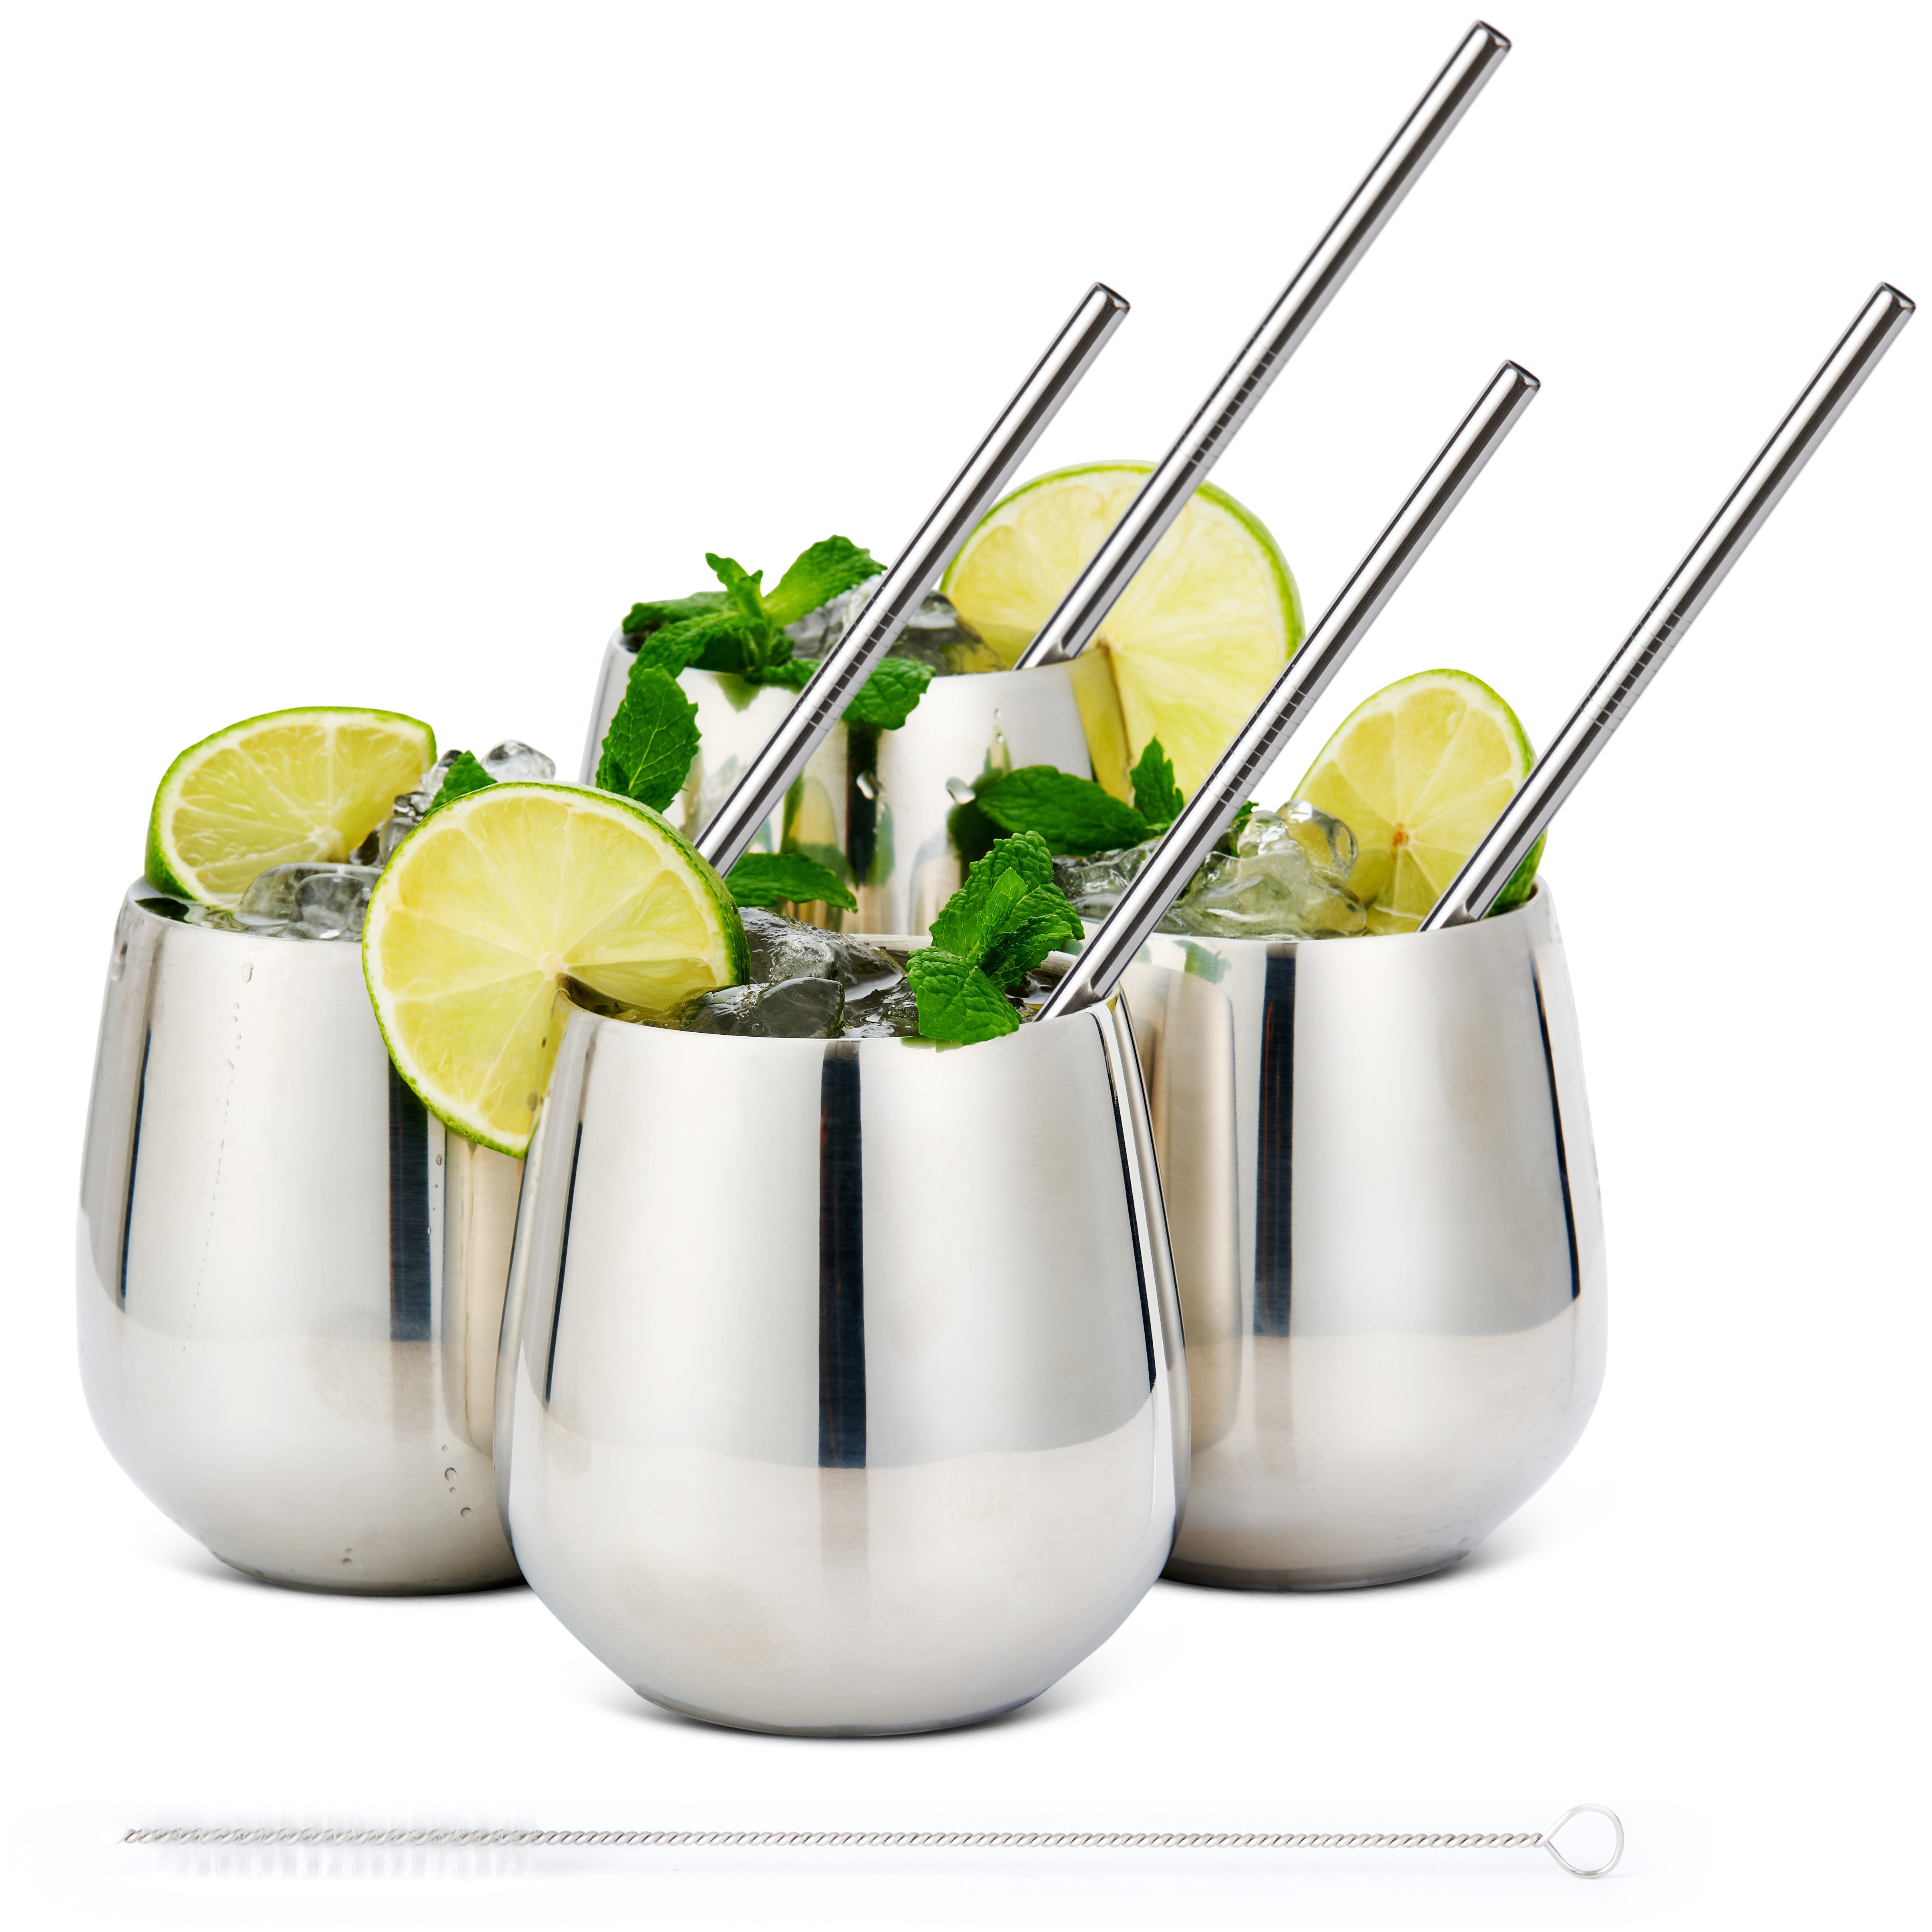 4 Silver Stainless Steel Tumblers with Straws